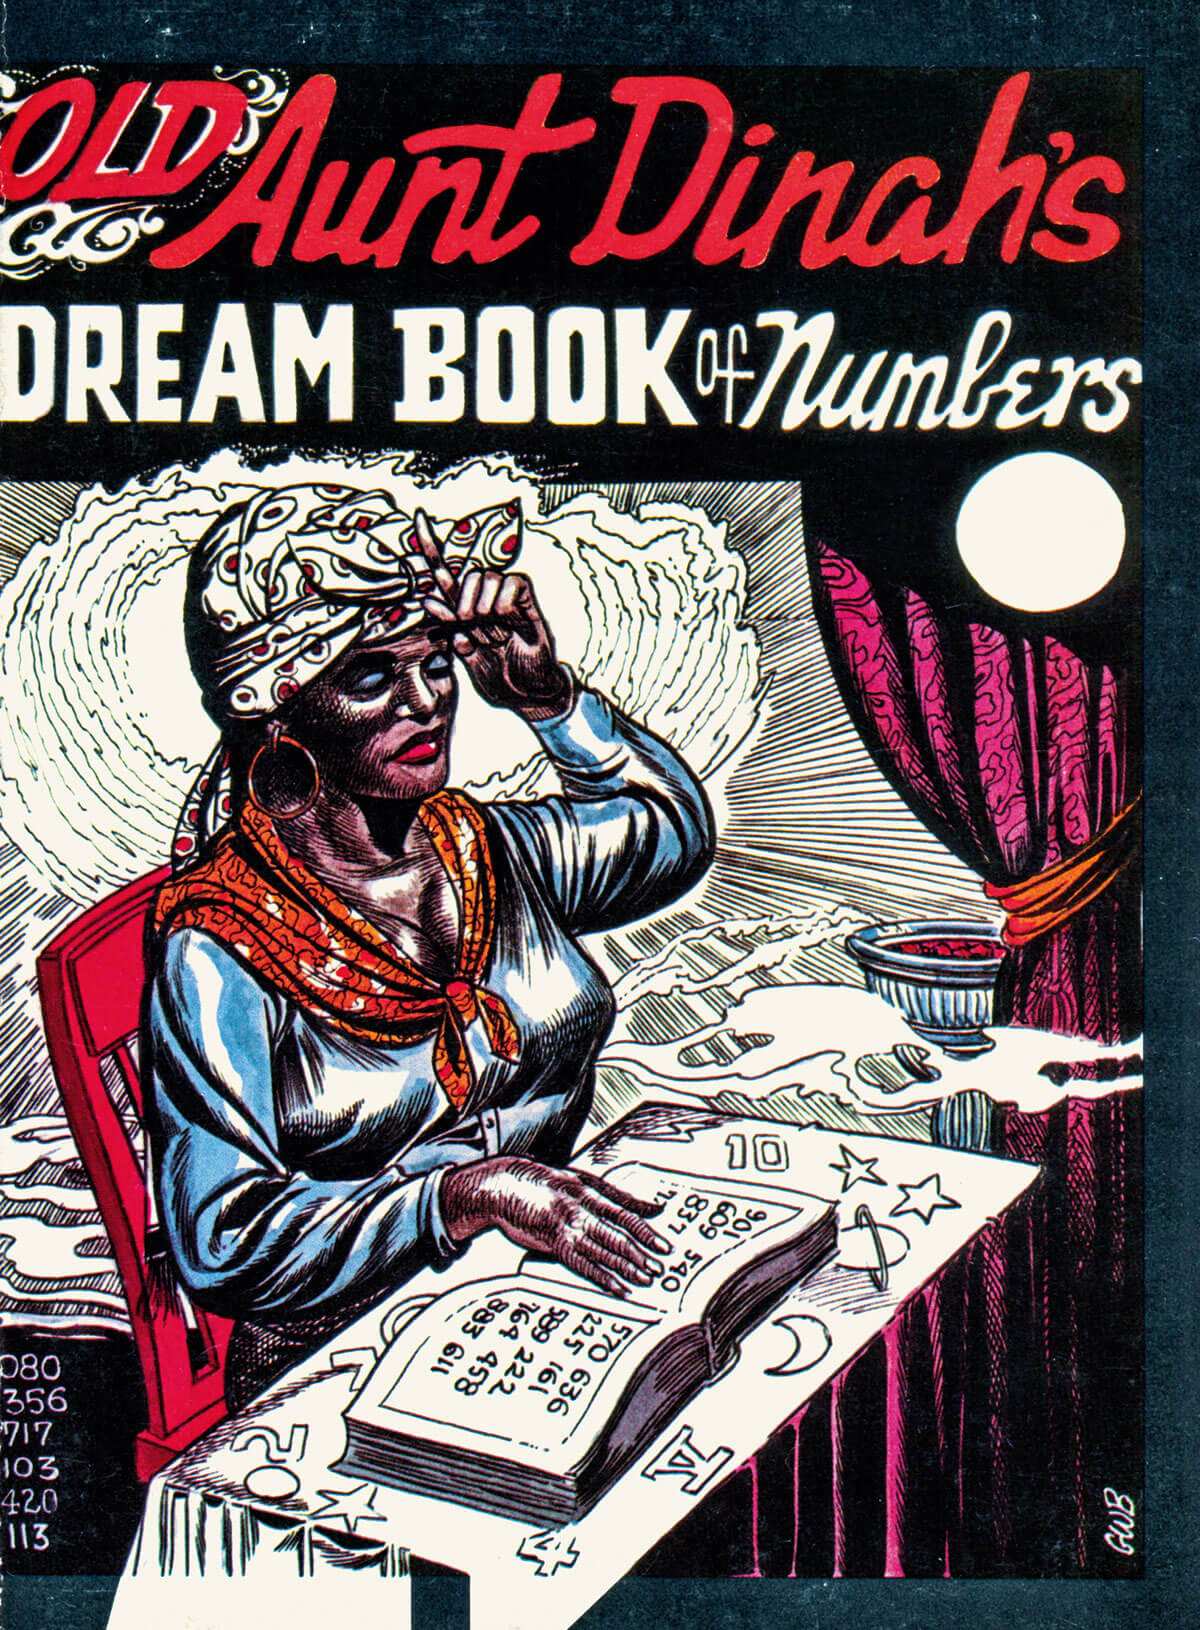 The front cover of “Old Aunt Dinah’s Dream Book of Numbers,” illustrated by Eugene Bilbrew and published by Wholesale in nineteen seventy-two. 